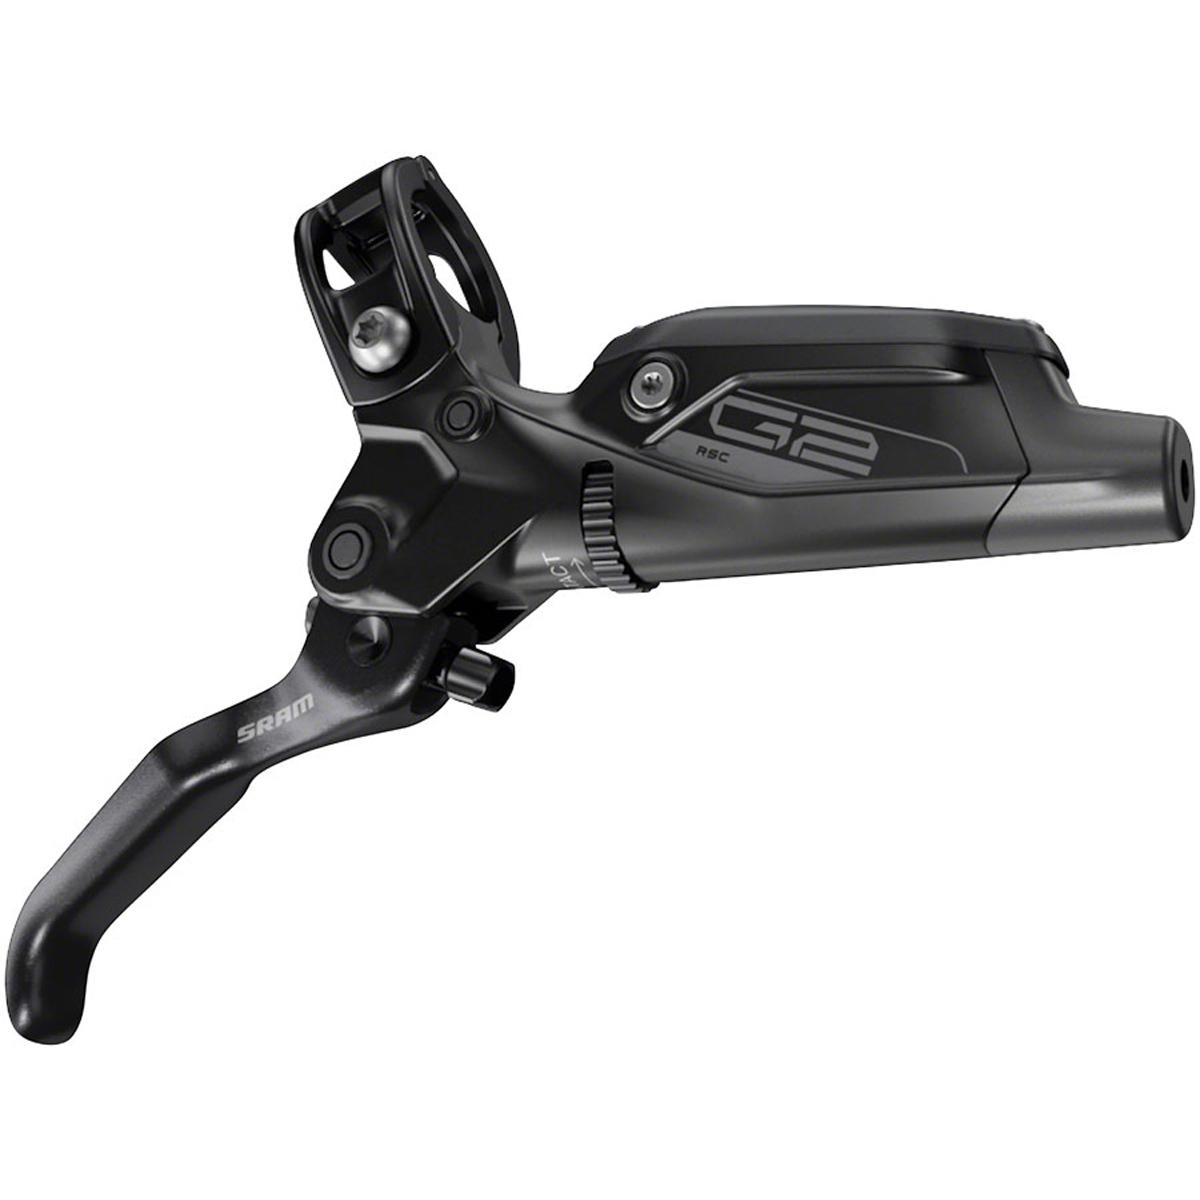 SRAM G2 RSC Front Hydraulic Disc Brake and